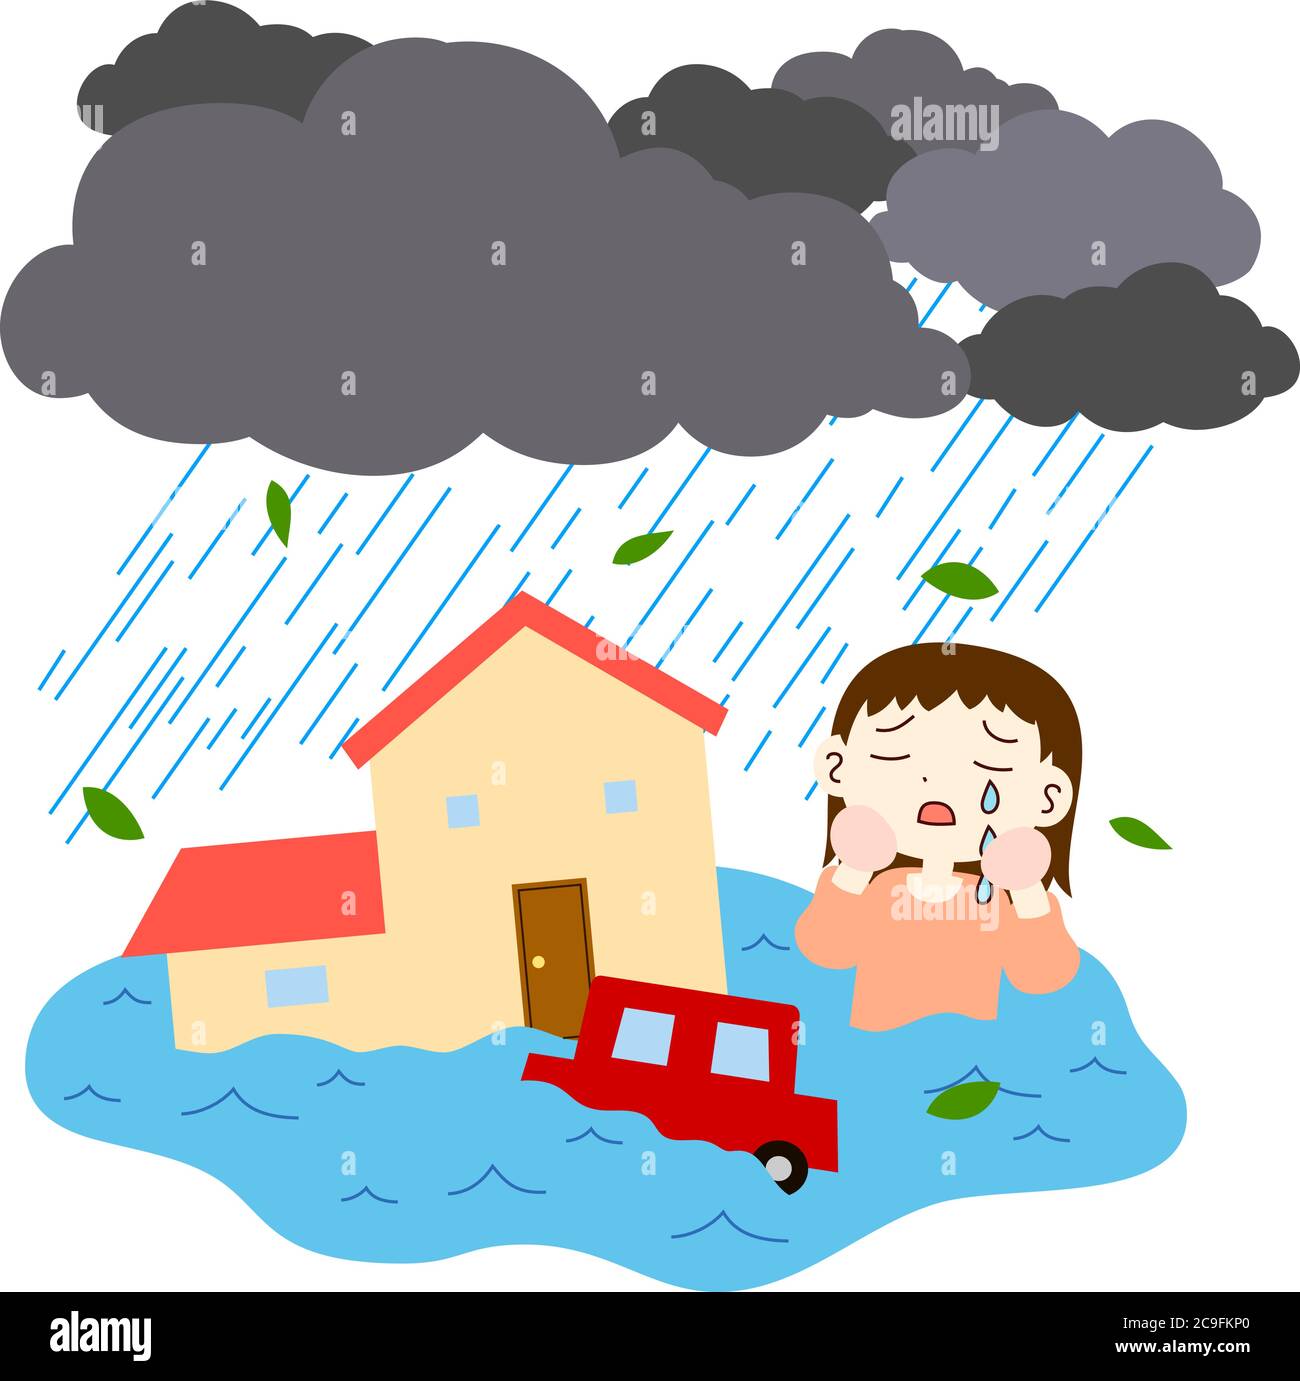 This is a illustration of Town affected by heavy rain and flood Stock Vector